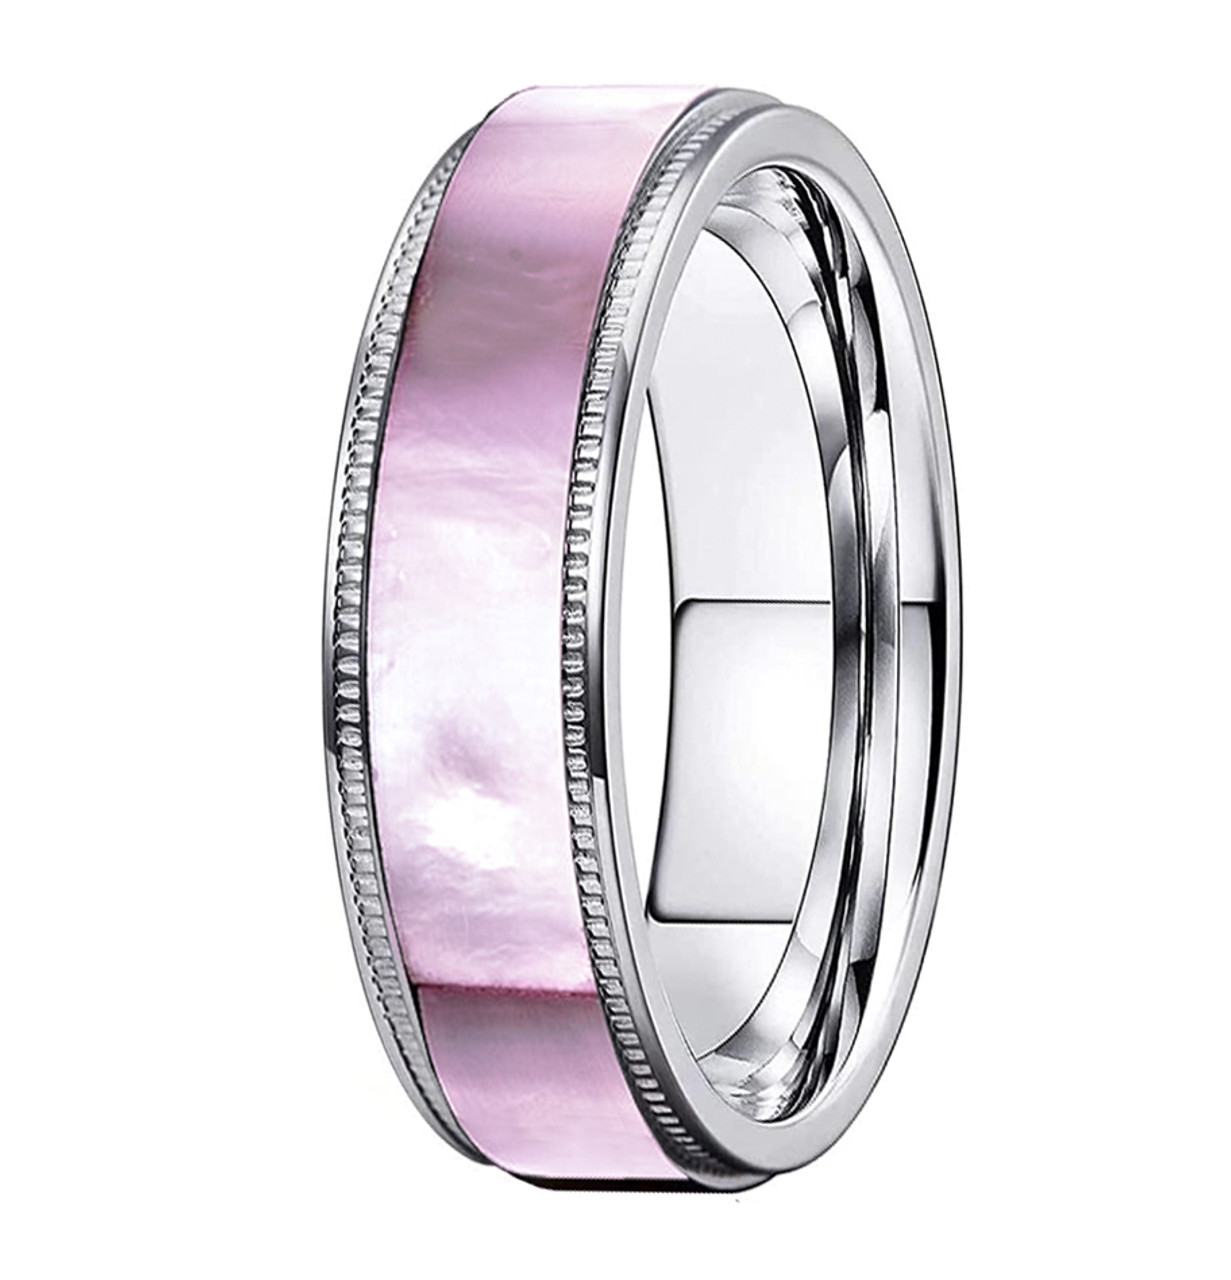 (5mm)  Unisex or Women's Titanium Wedding ring bands. Titanium Women's Pink Hues Mother of Pearl Inlaid Band Ring. Light Weight and Comfort Fit.